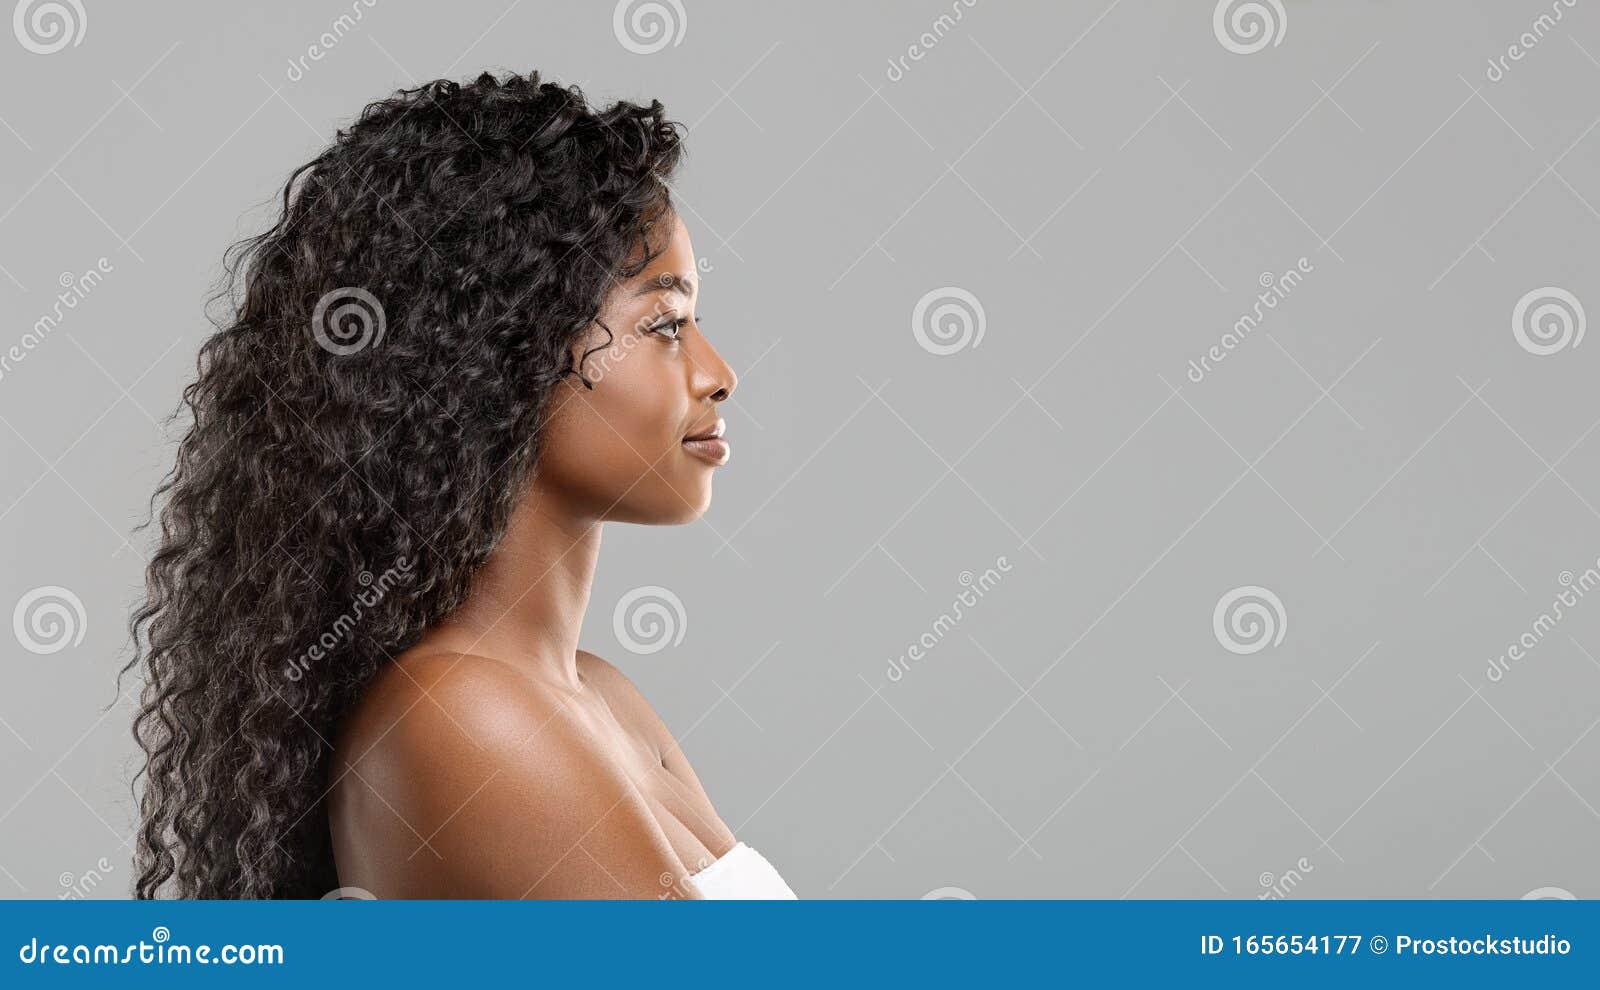 224 Beautiful Girl Perfect Skin Thick Curly Hair Stock Photos - Free &  Royalty-Free Stock Photos from Dreamstime